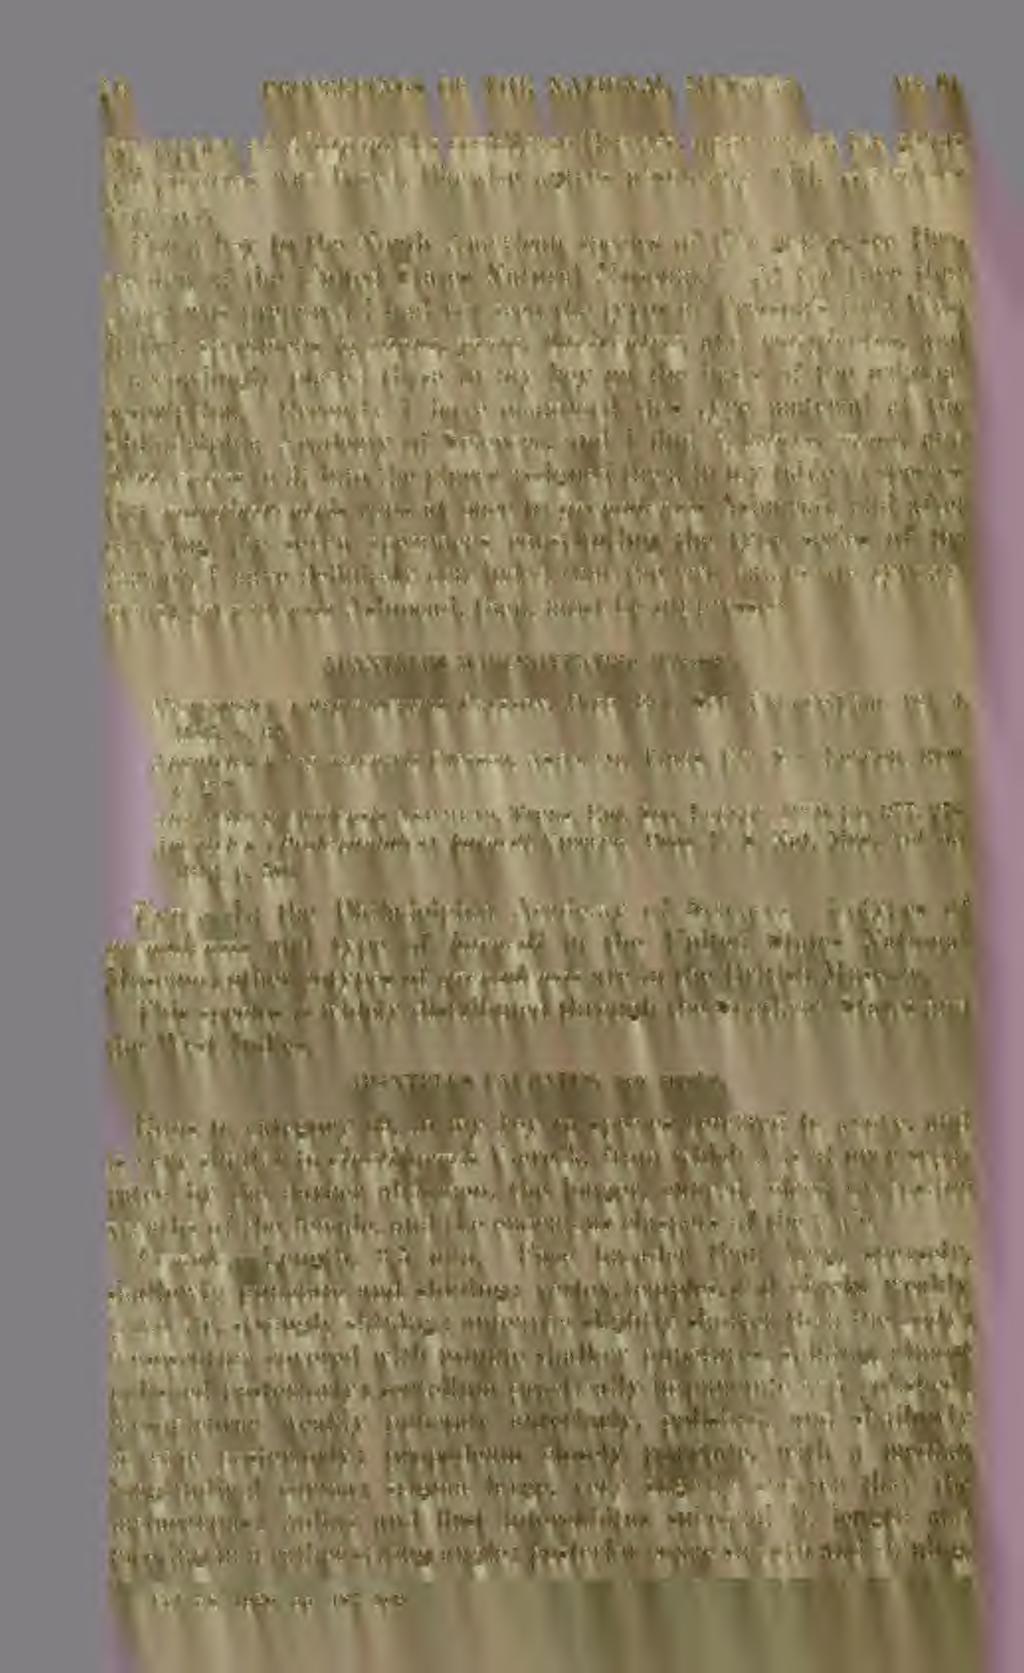 15 PKOCEEDINGS OF THE NATIONAL MUSEUM. vol.61. description of Allapanteles ceckliptae Brethes, upon AYhicli the genus Allapanteles was based, likewise agrees absolutely with Apanteles Foerster.